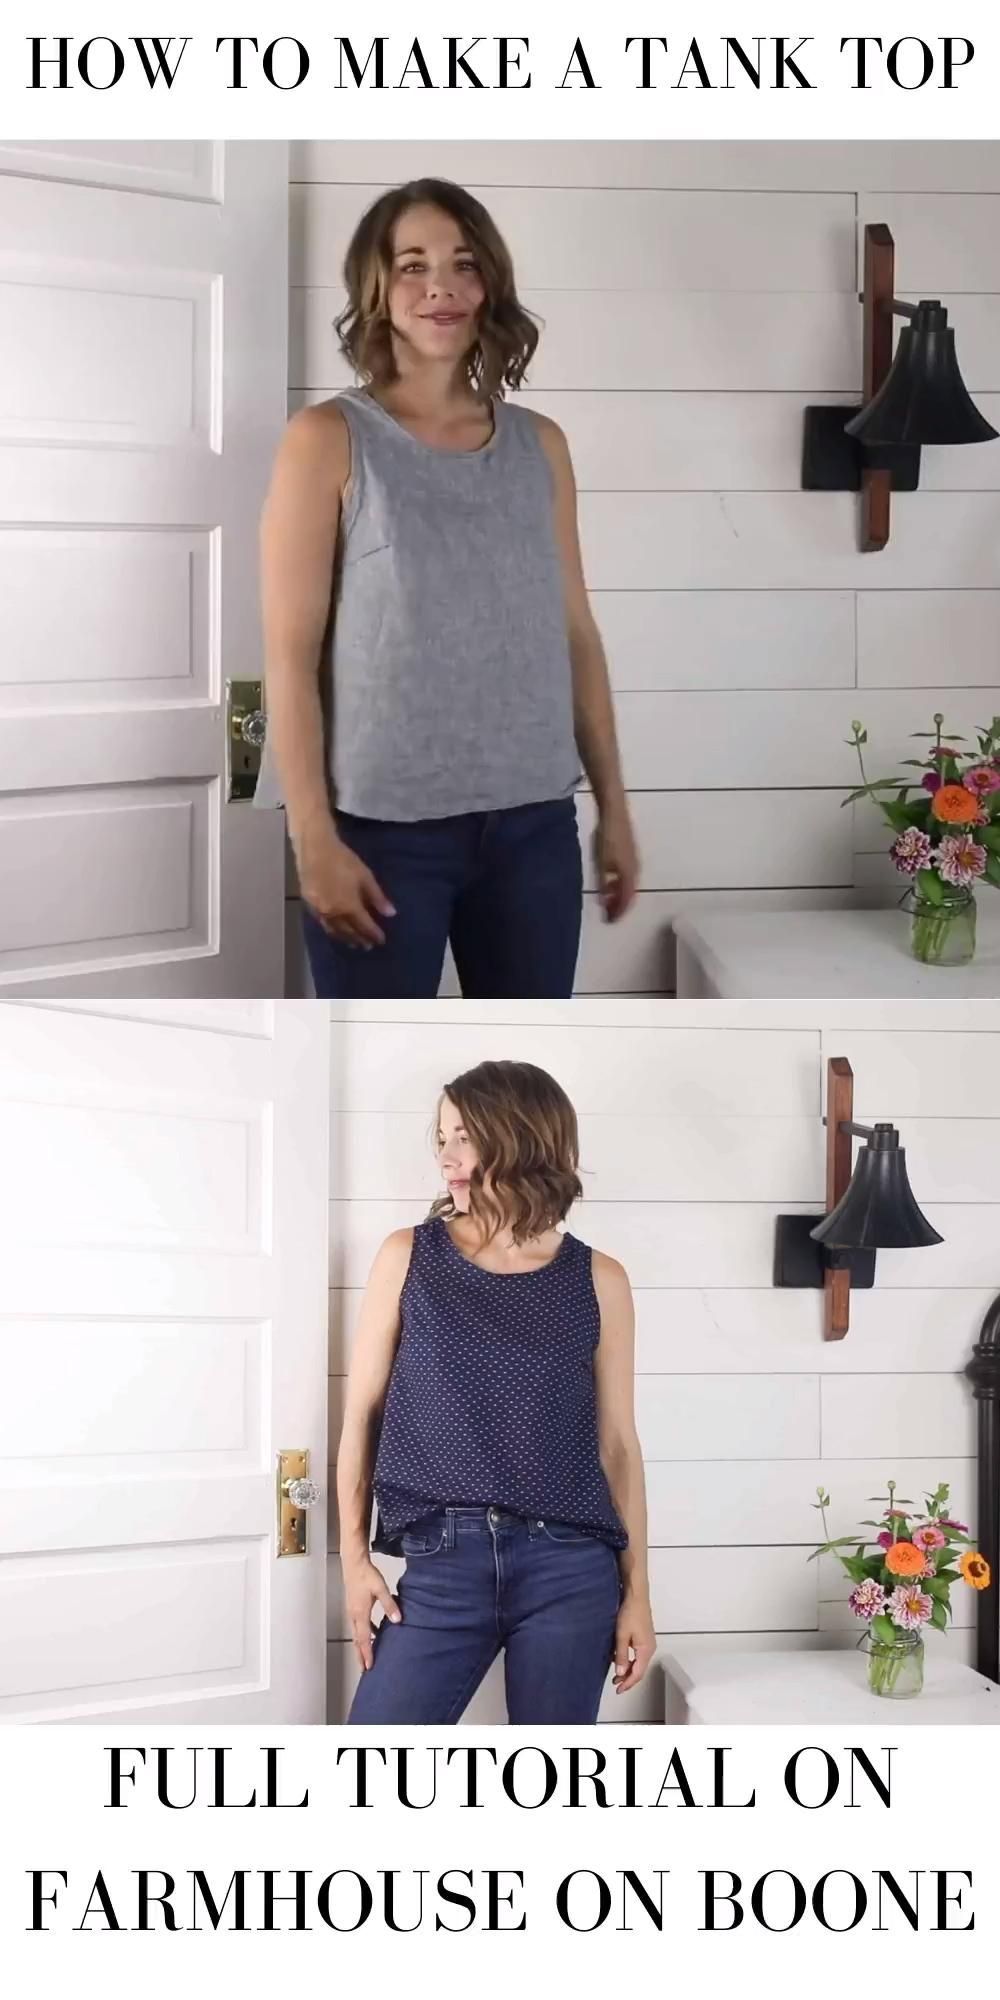 How to make a tank top - How to make a tank top -   17 diy Clothes making ideas